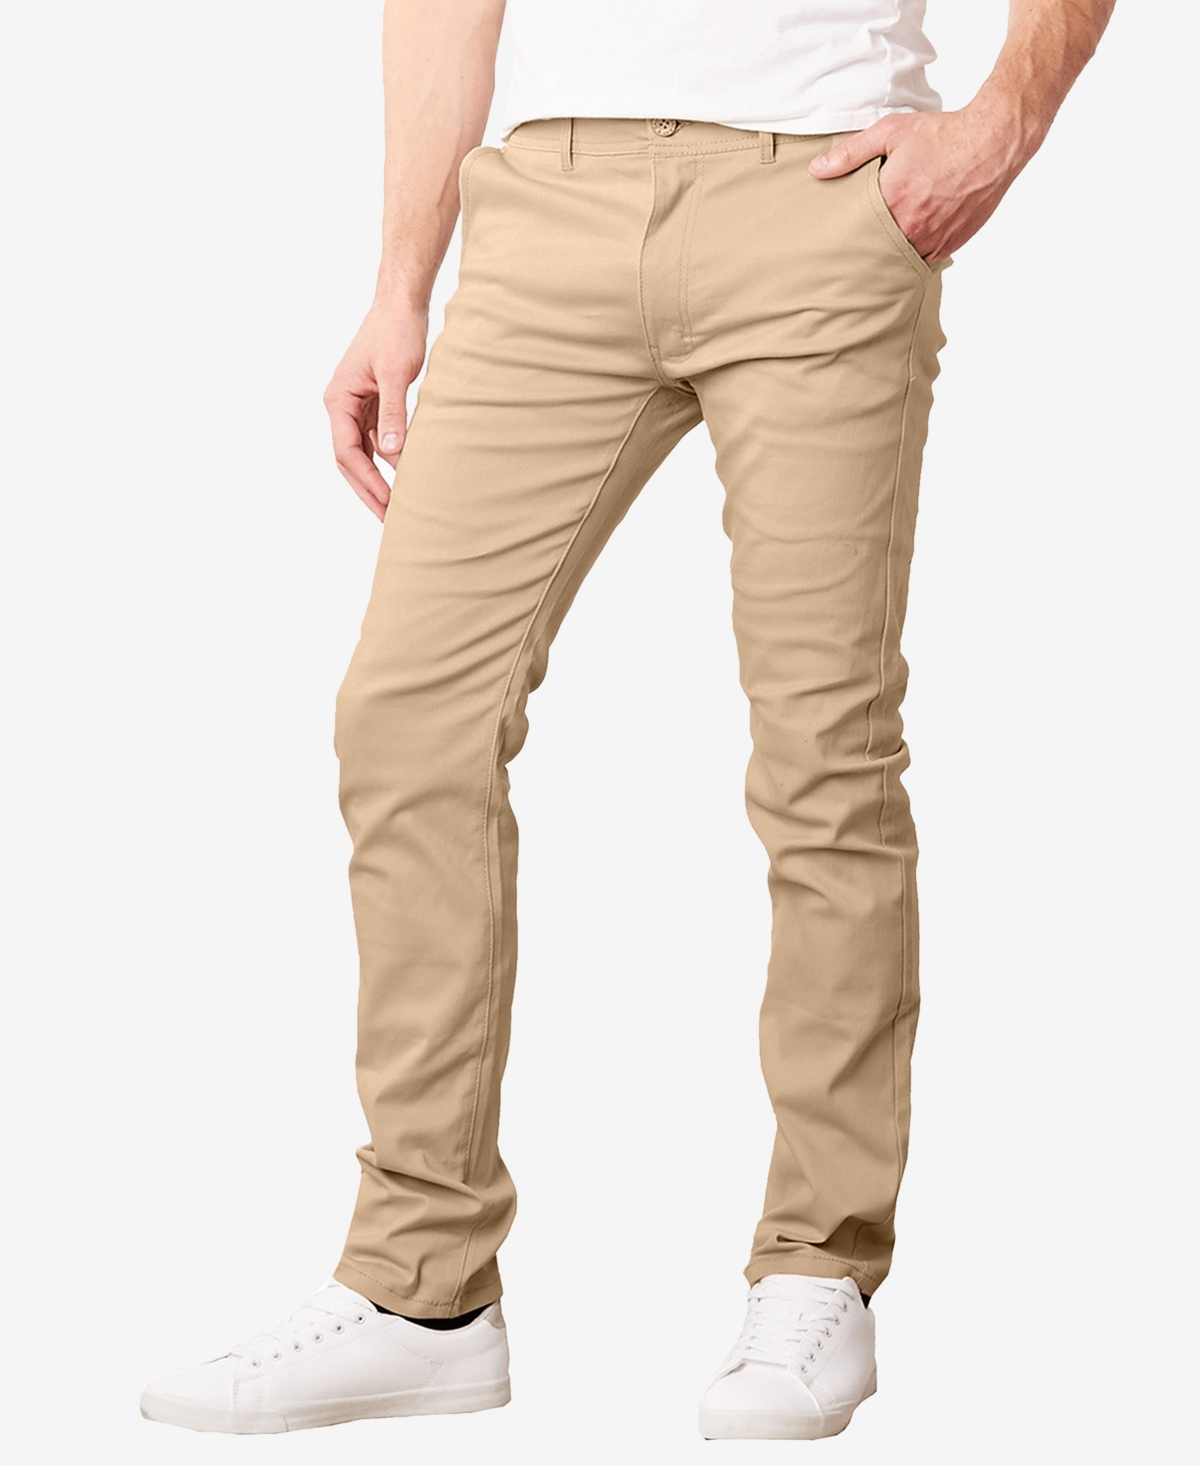 Galaxy By Harvic Men's Super Stretch Slim Fit Everyday Chino Pants In Khaki